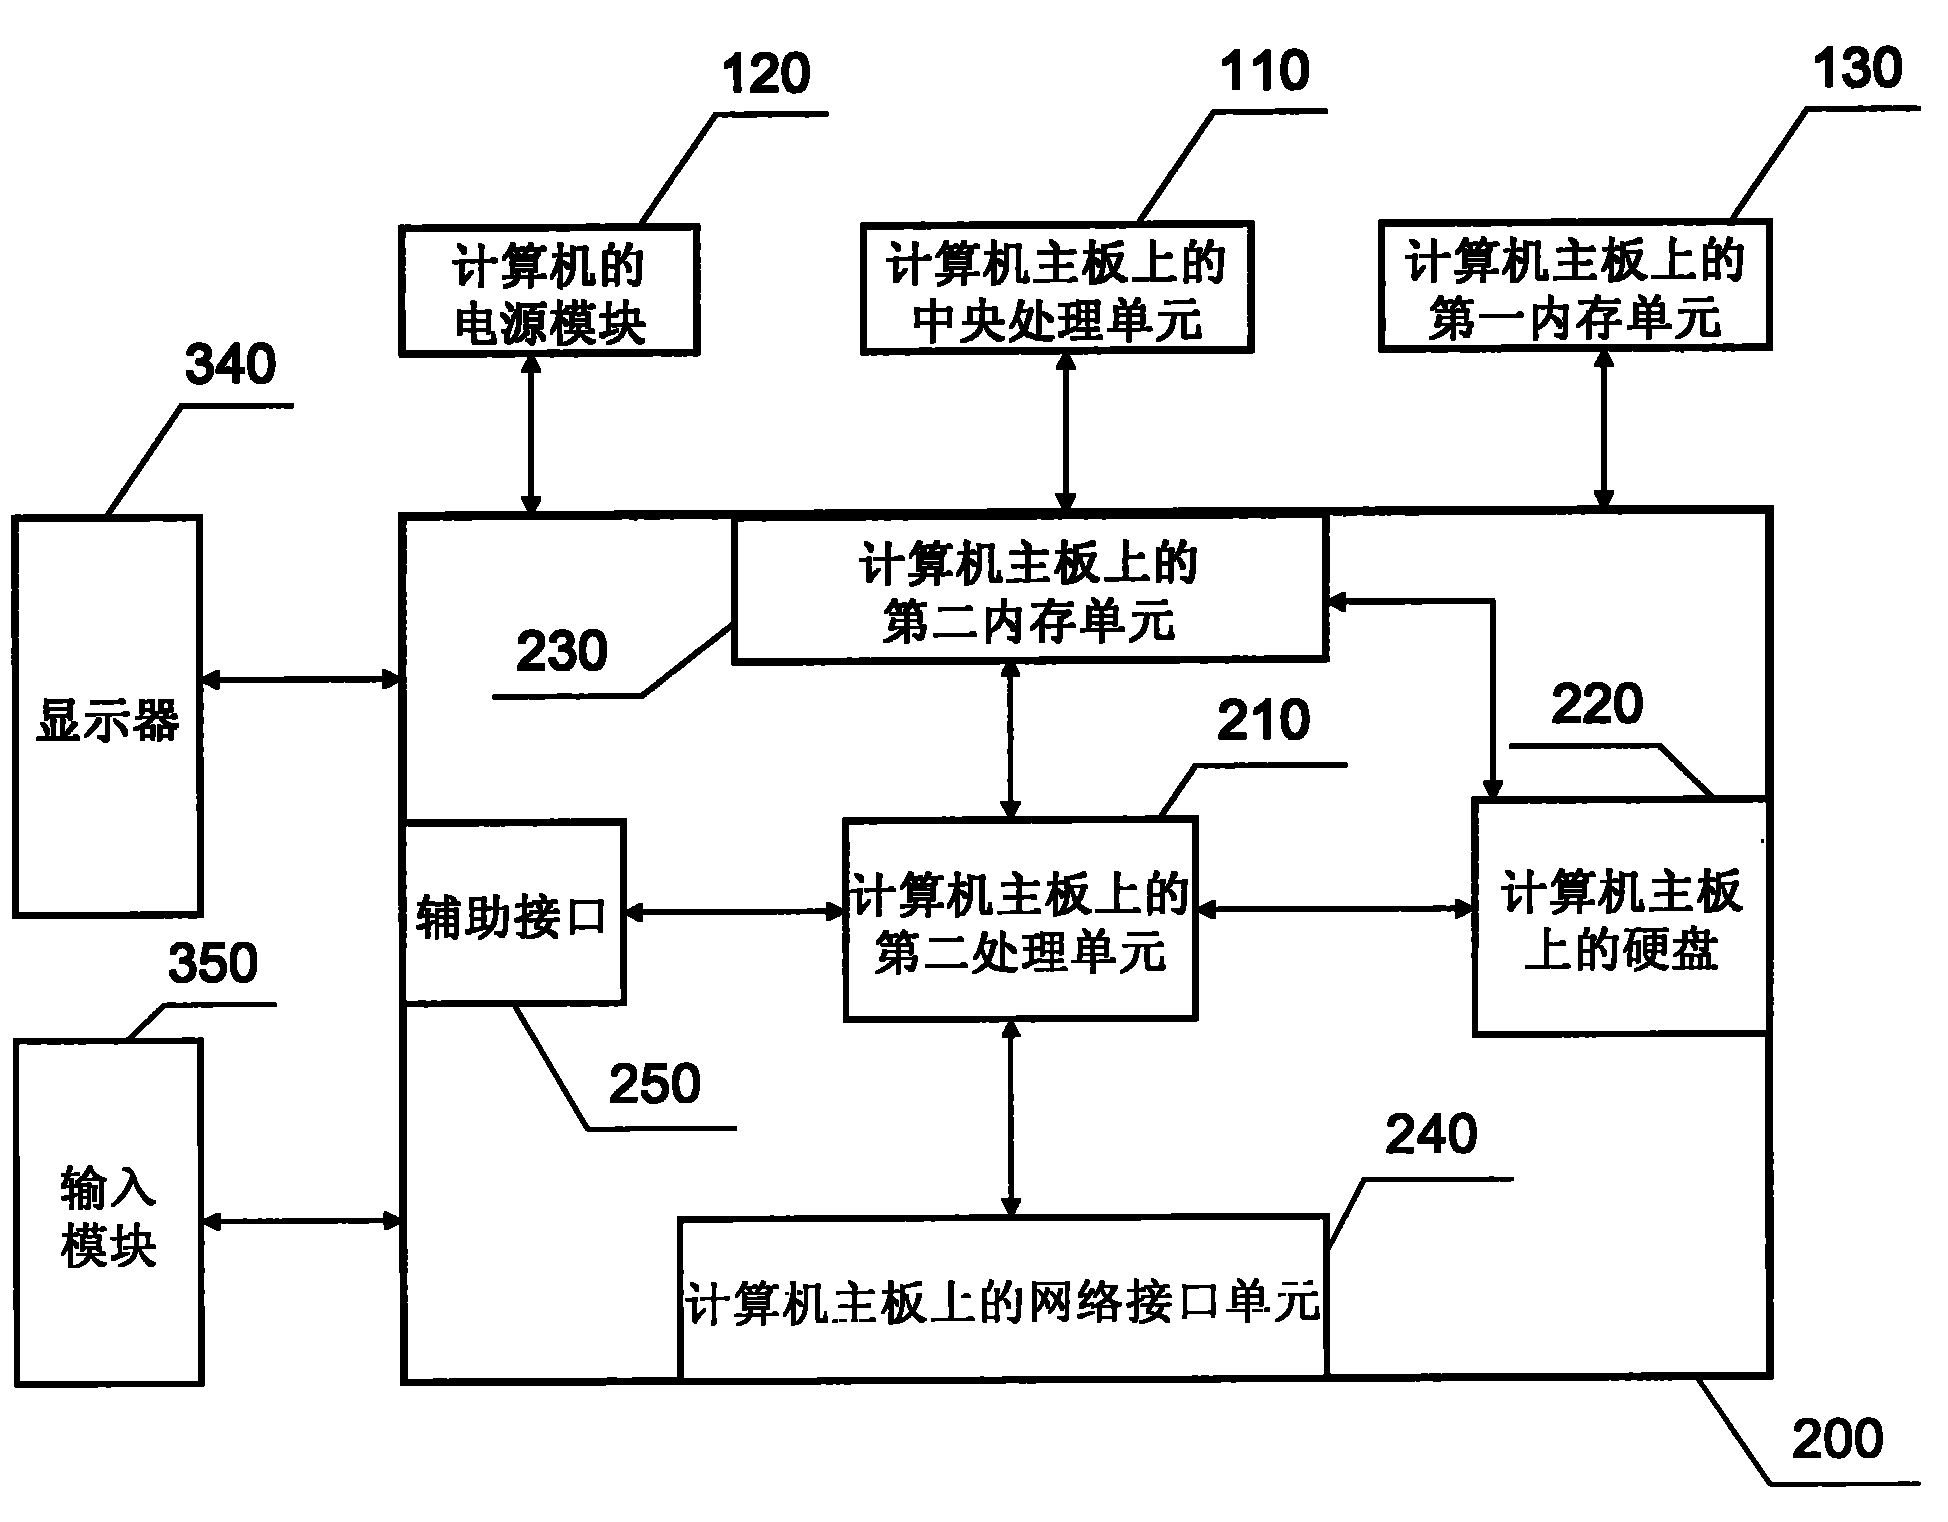 Computer with built-in network storage device